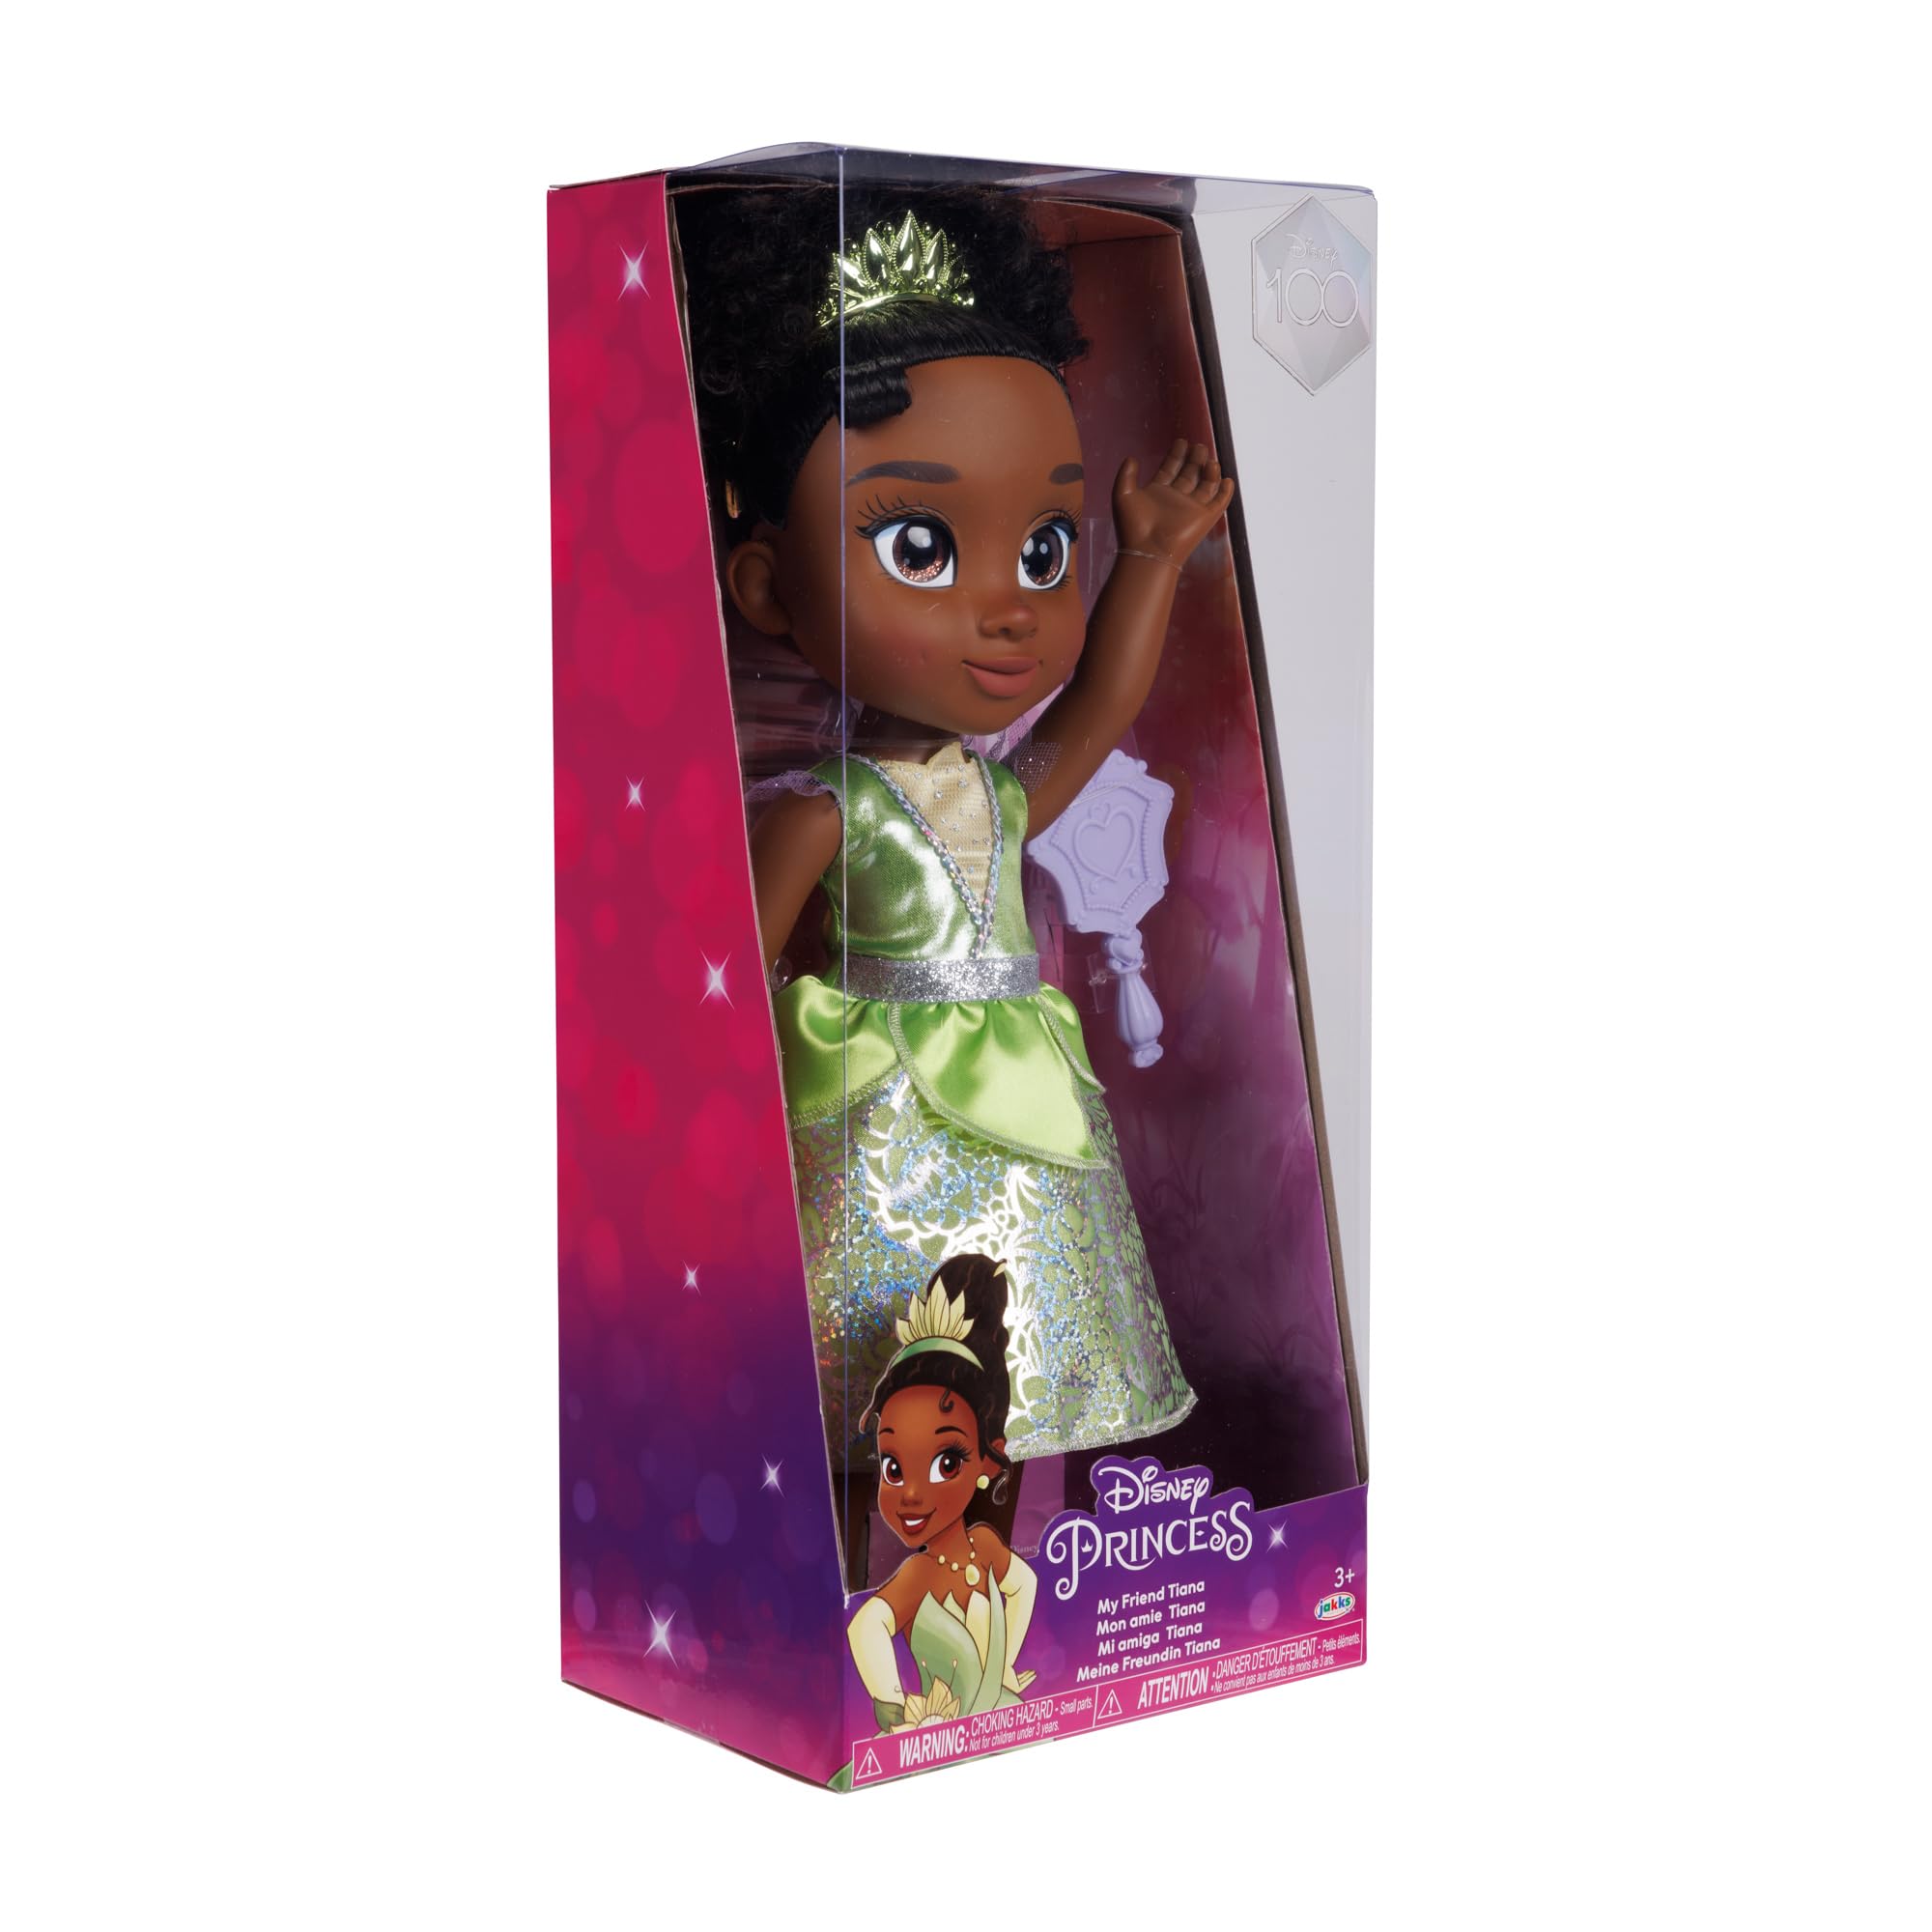 Disney Princess Disney 100 My Friend Tiana Doll 14 inch Tall Includes Removable Outfit and Tiara